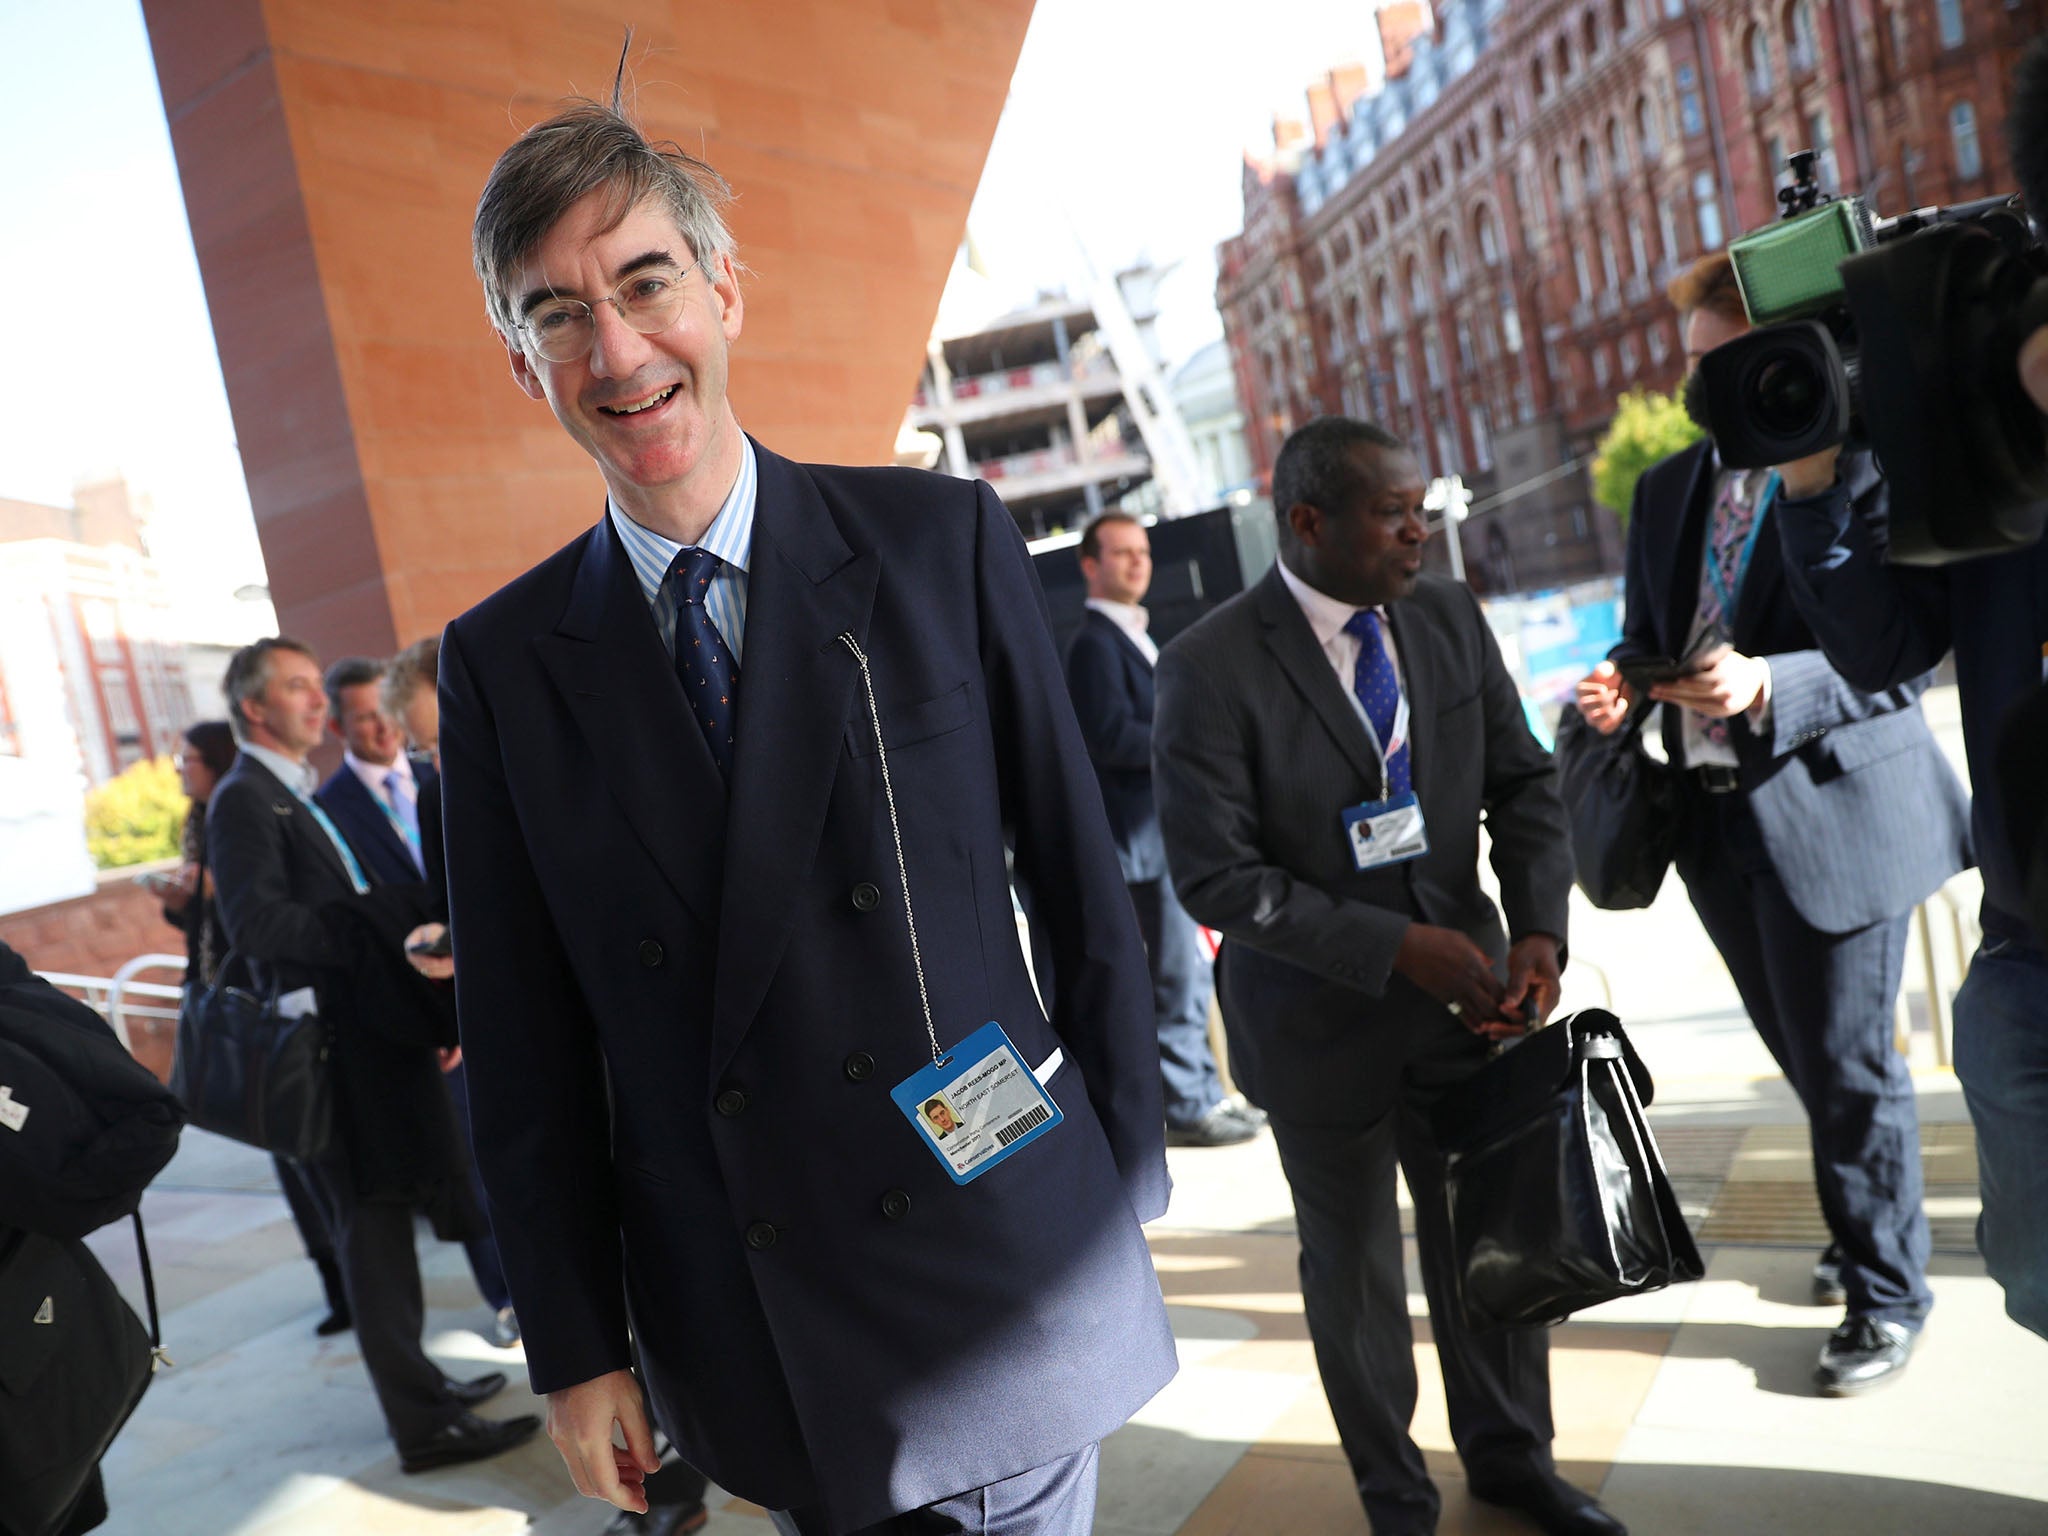 Social media has made the anti-establishment mood all the more powerful, and Jacob Rees-Mogg's tool of choice is Instagram